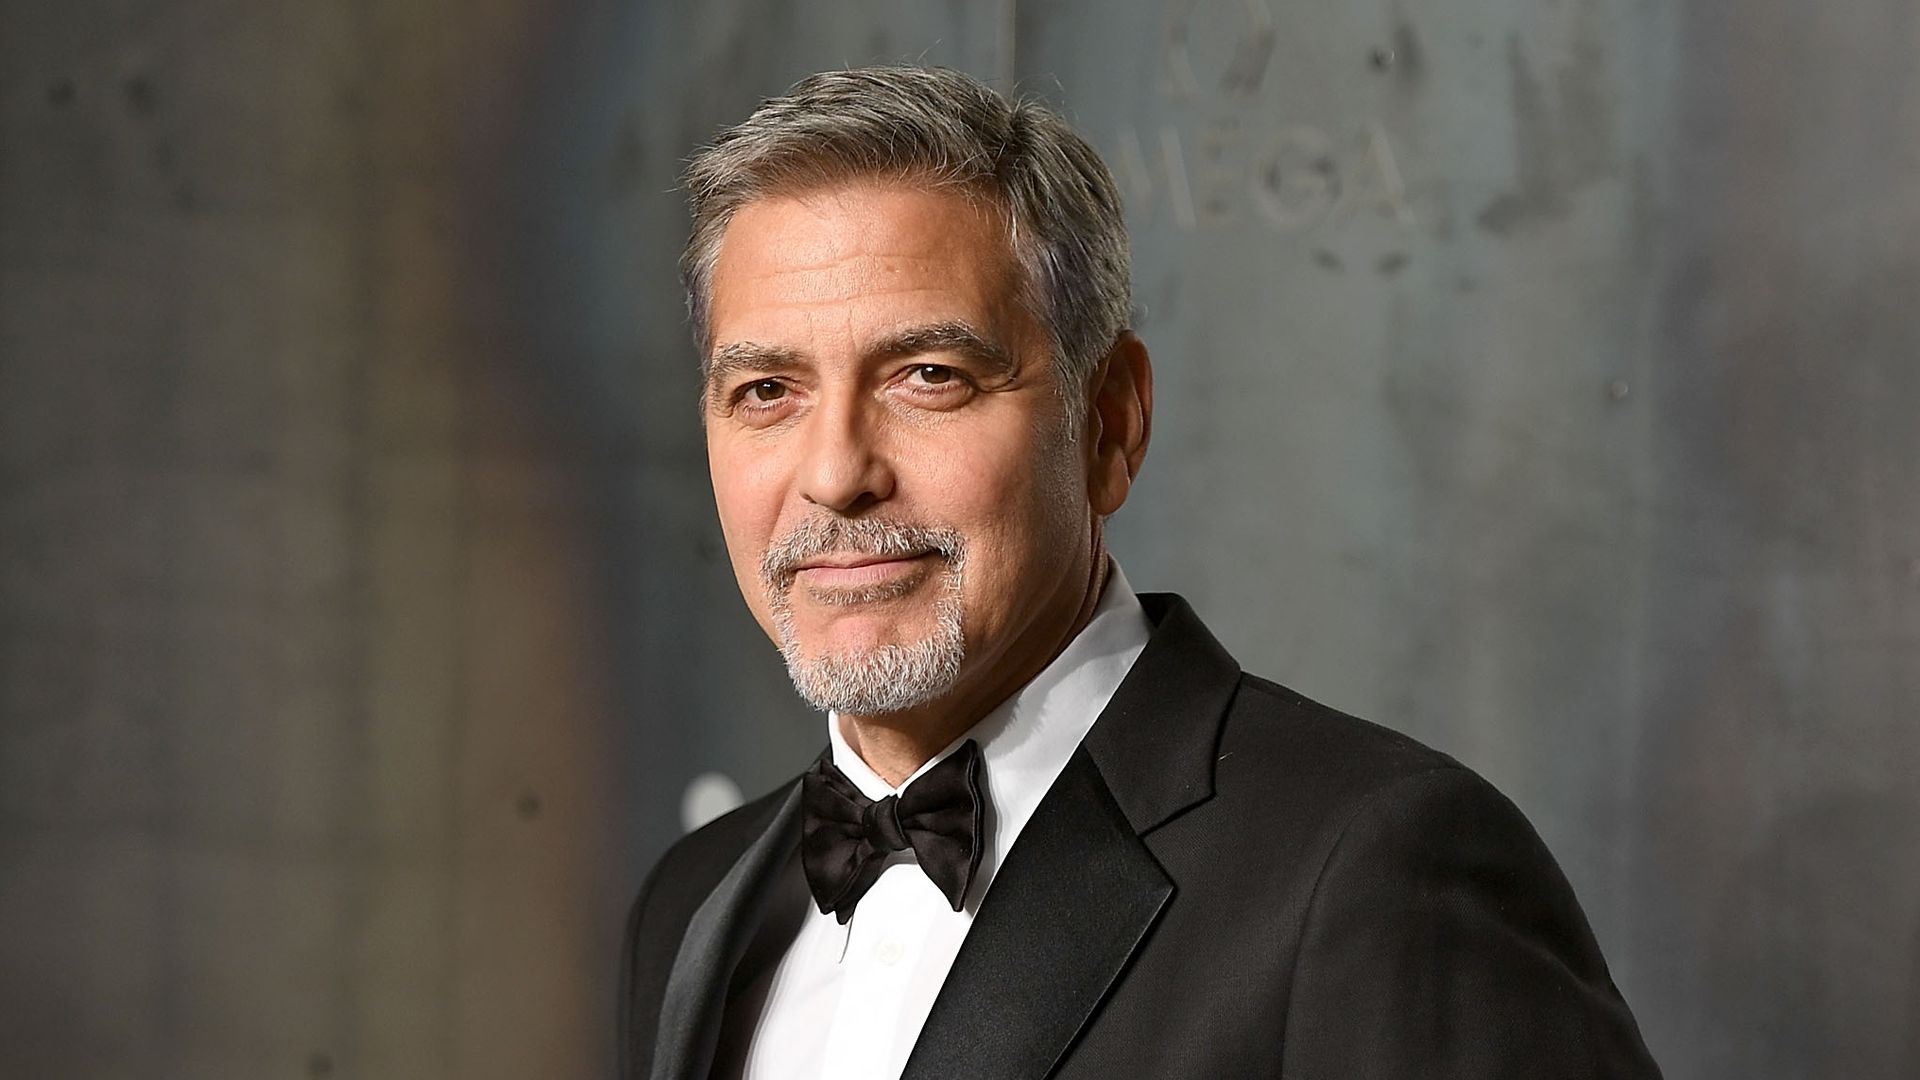 Hot TBT: That time George Clooney was 'Modern Family's' irresistible love interest